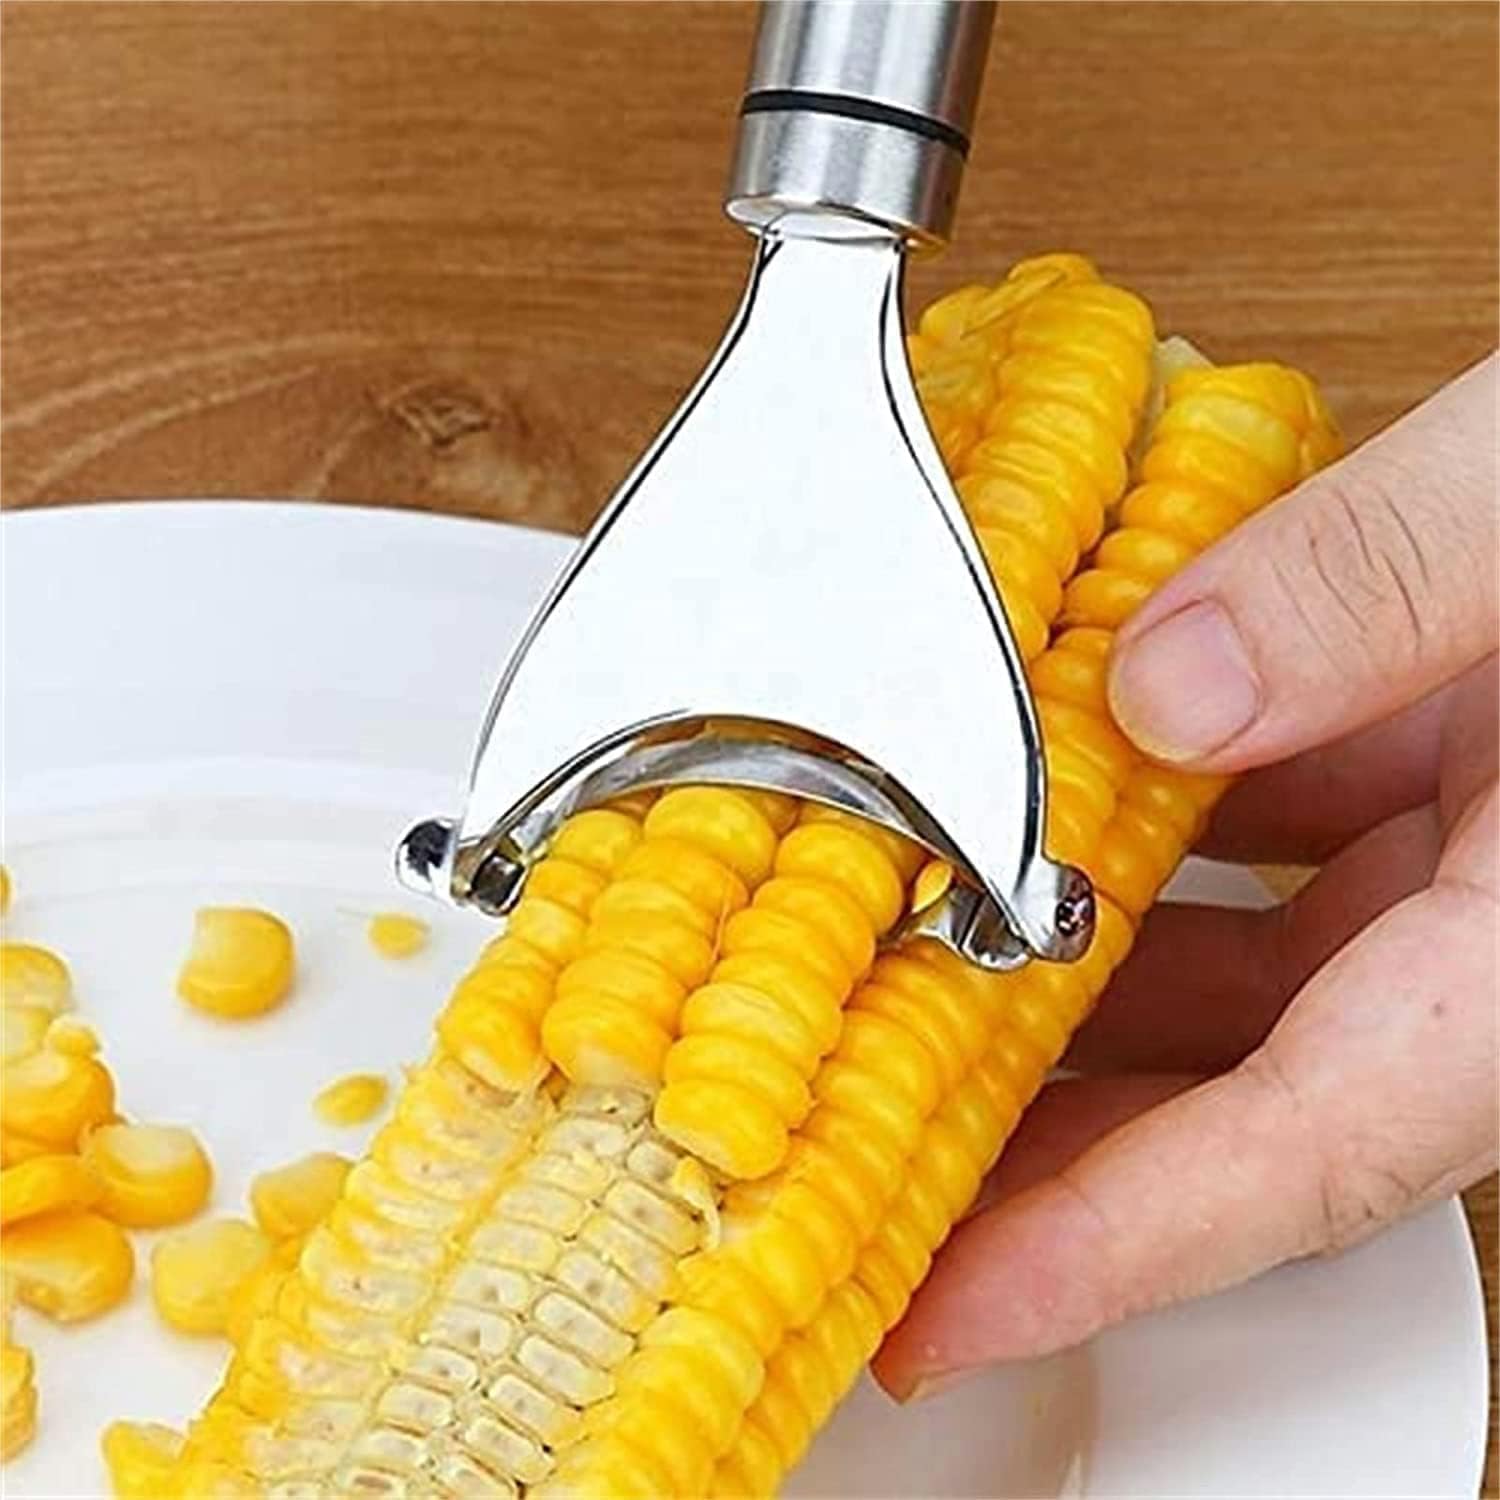 Corn Peeler Corn Stripping Tool for Home Kitchen with Stainless Steel Serrated Blade Corn Stripper Kitchen Tool Cob Corn Stripper Just Push Corn Through The Device